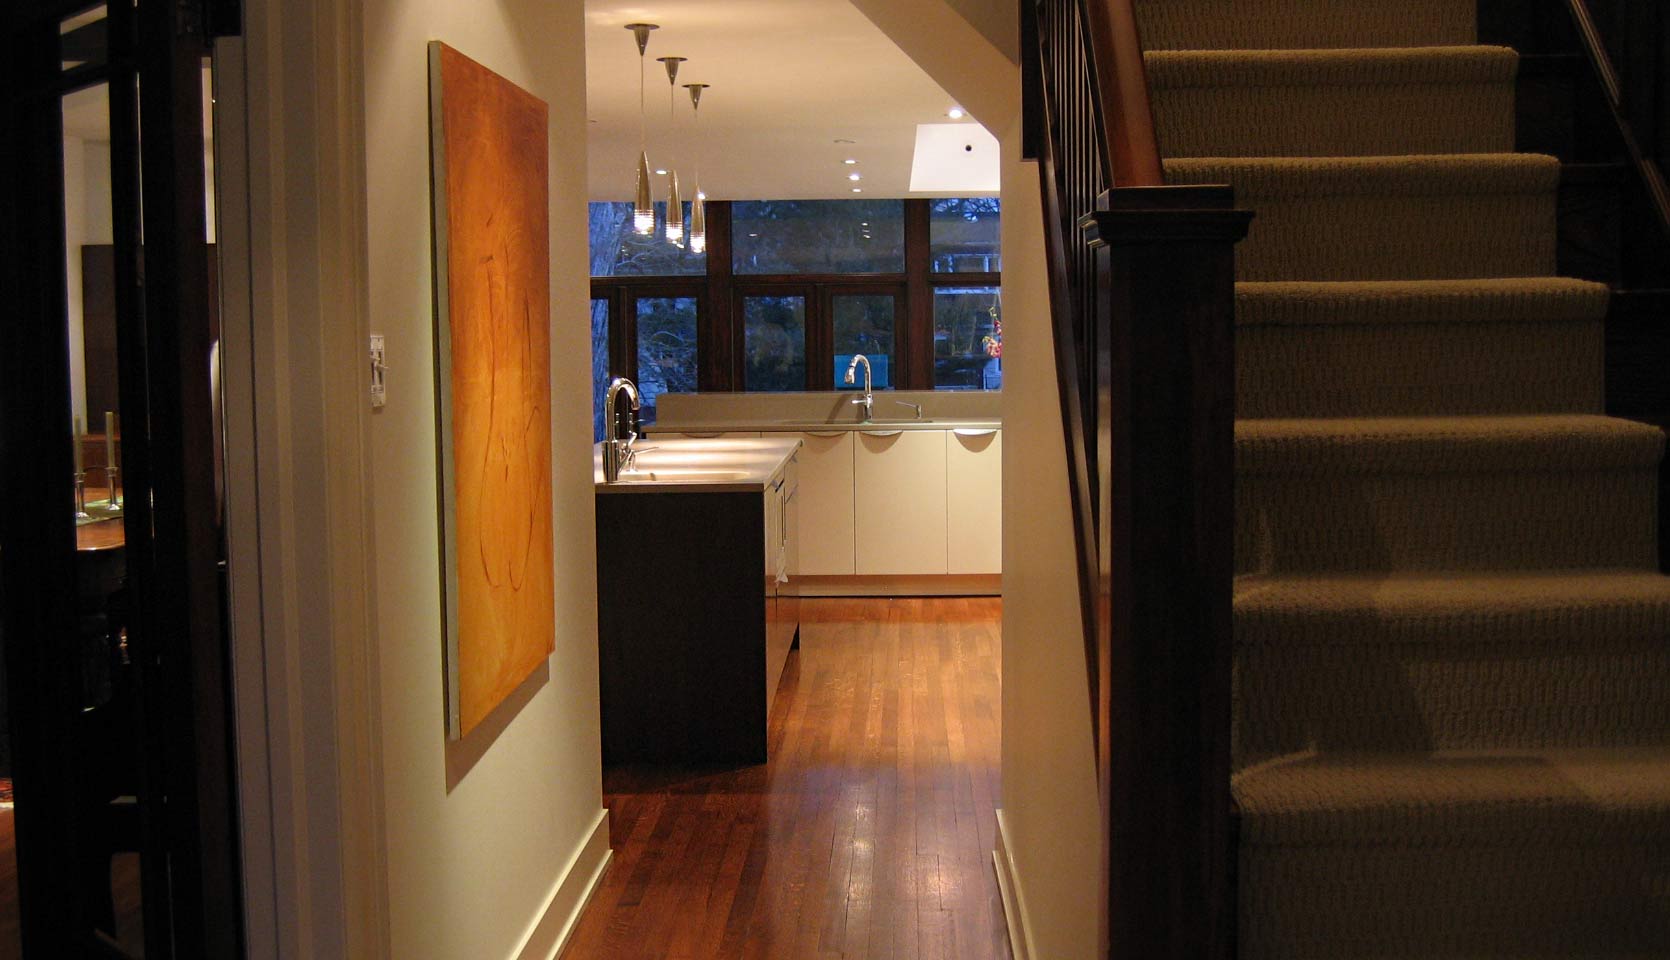 View of staircase leading up to the second story and shot of kitchen island and sink